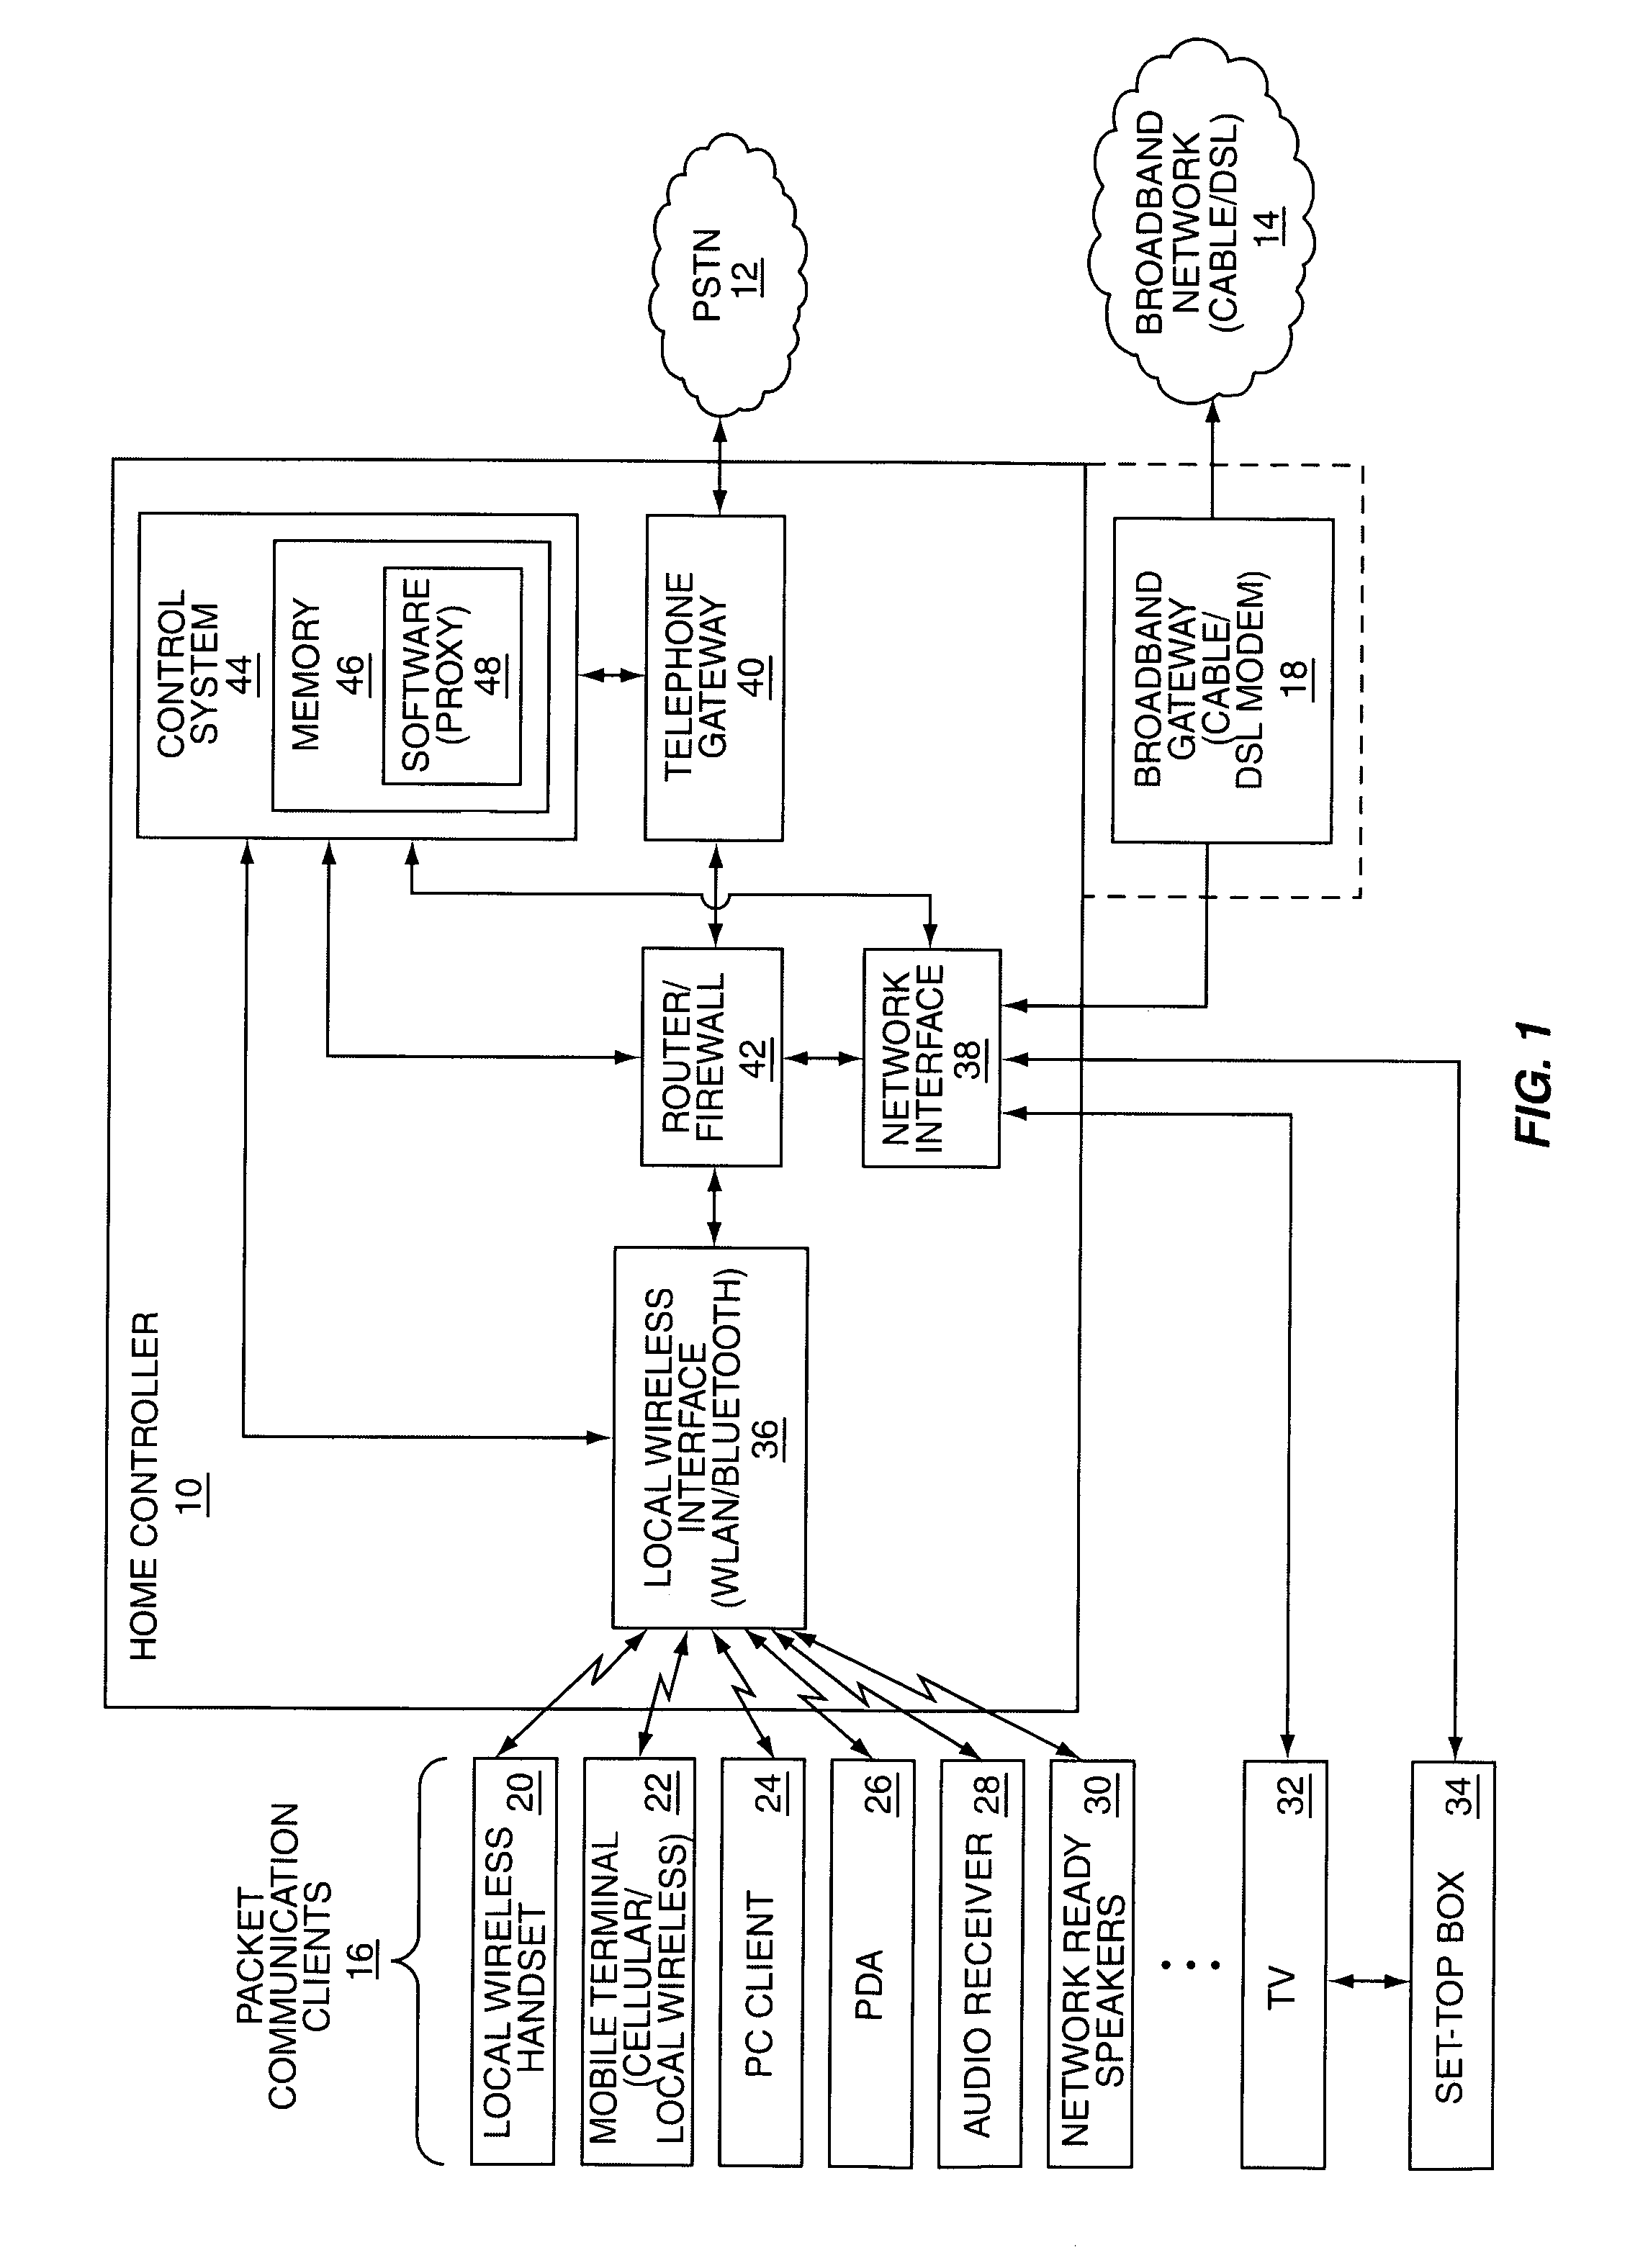 Integrated home service network